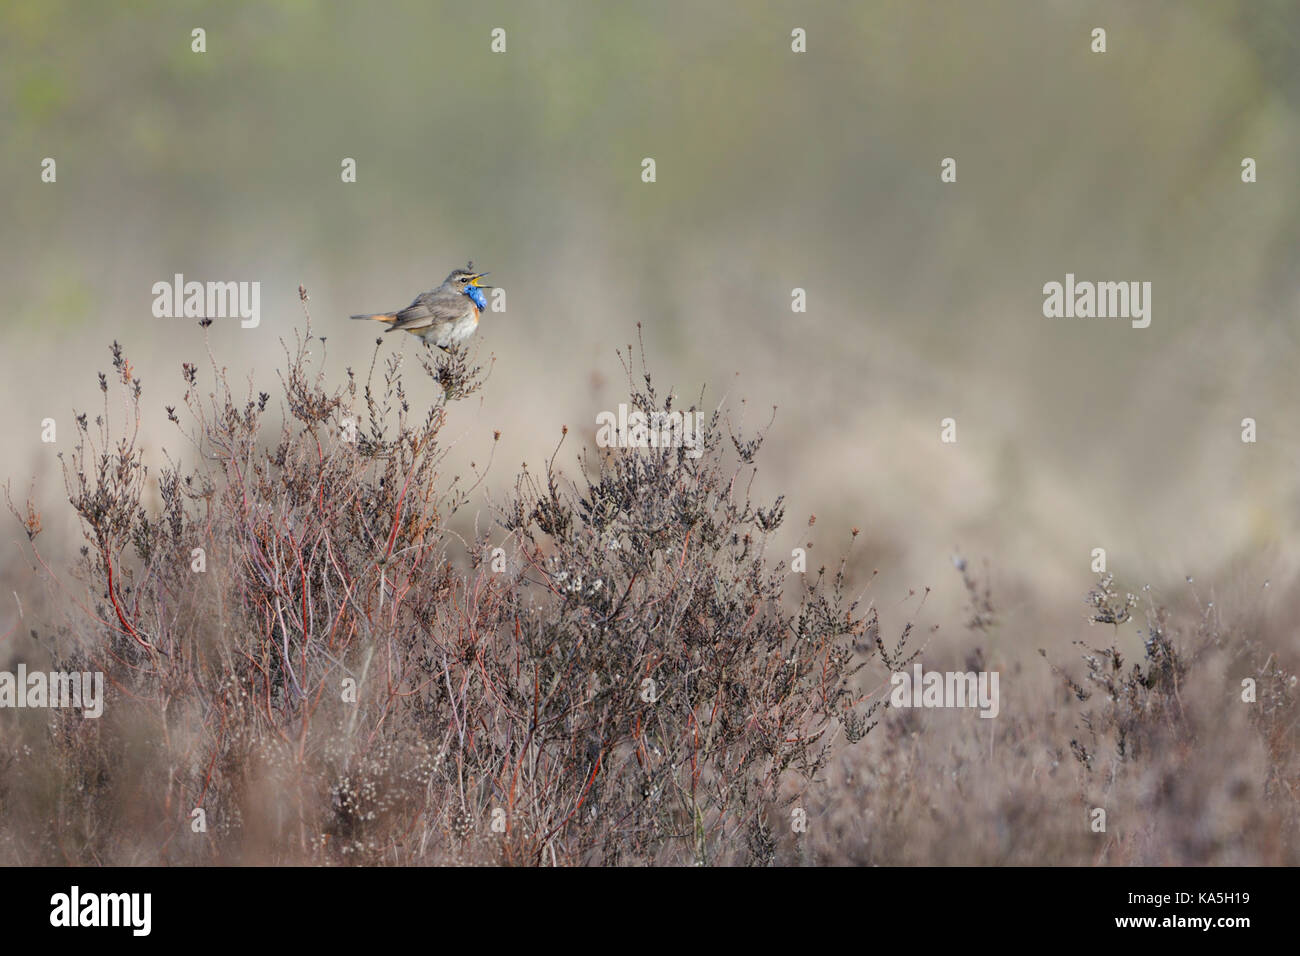 White-spotted Bluethroat / Blaukehlchen ( Luscinia svecica ) singing its song, sitting in heather, wildlife, Europe. Stock Photo